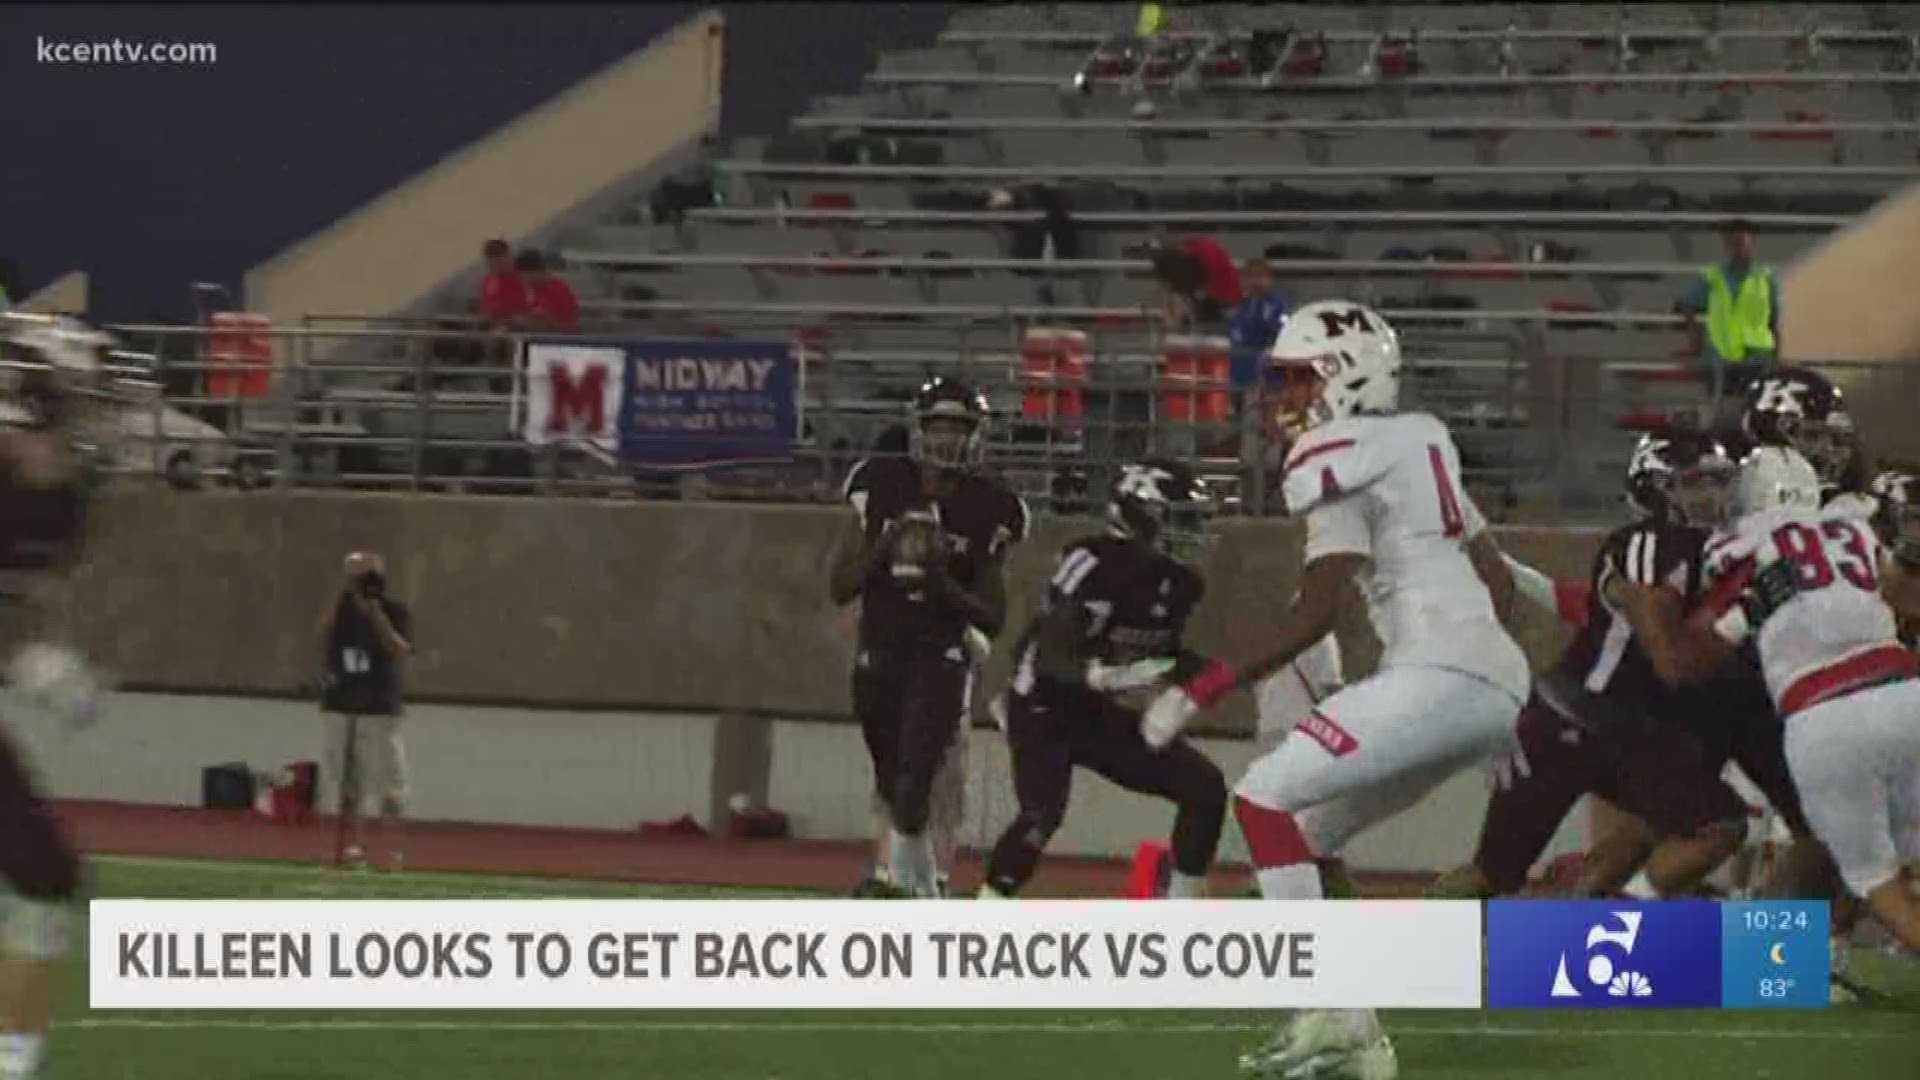 The Kangaroos look to get back on track when they face a Copperas Cove team that fell to Belton 35-28 in two days.